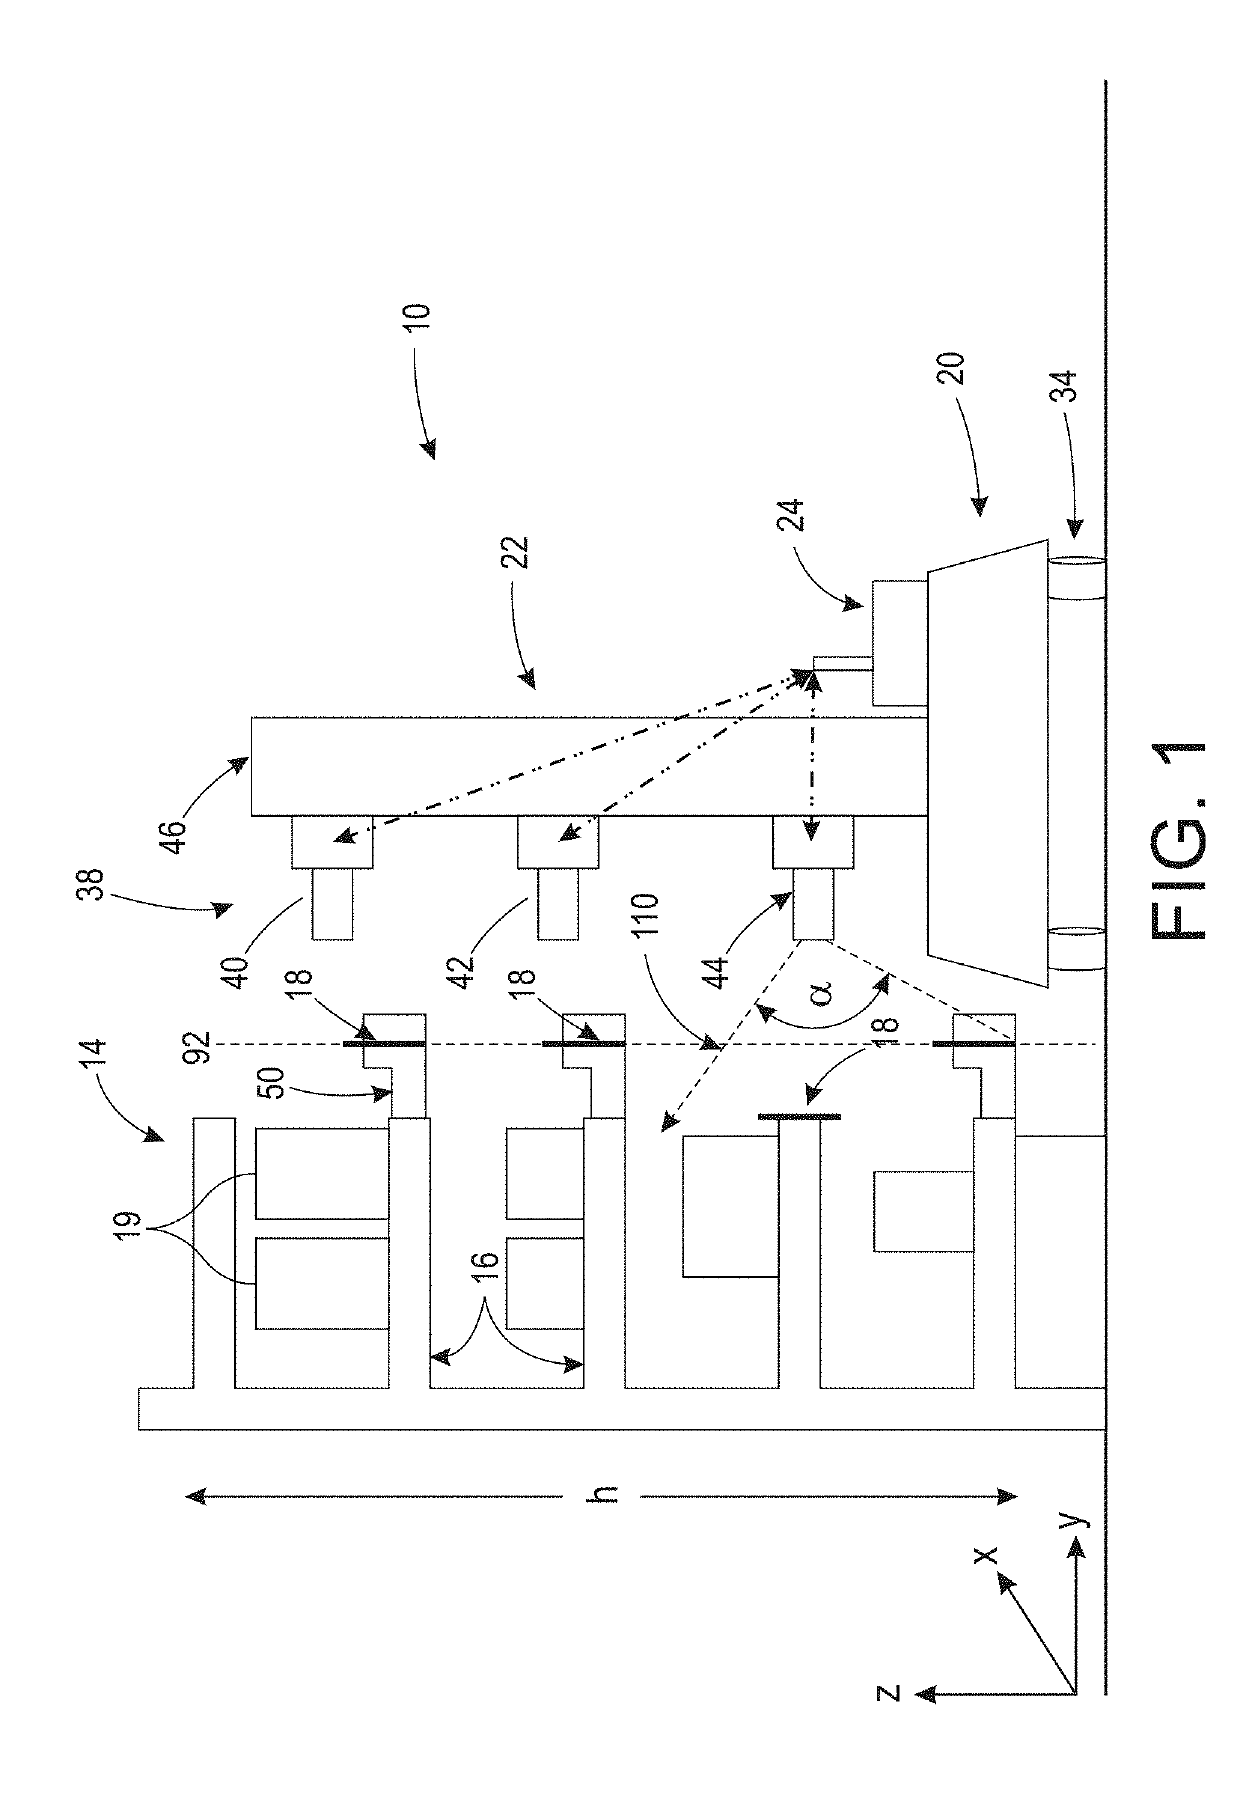 Store shelf imaging system and method